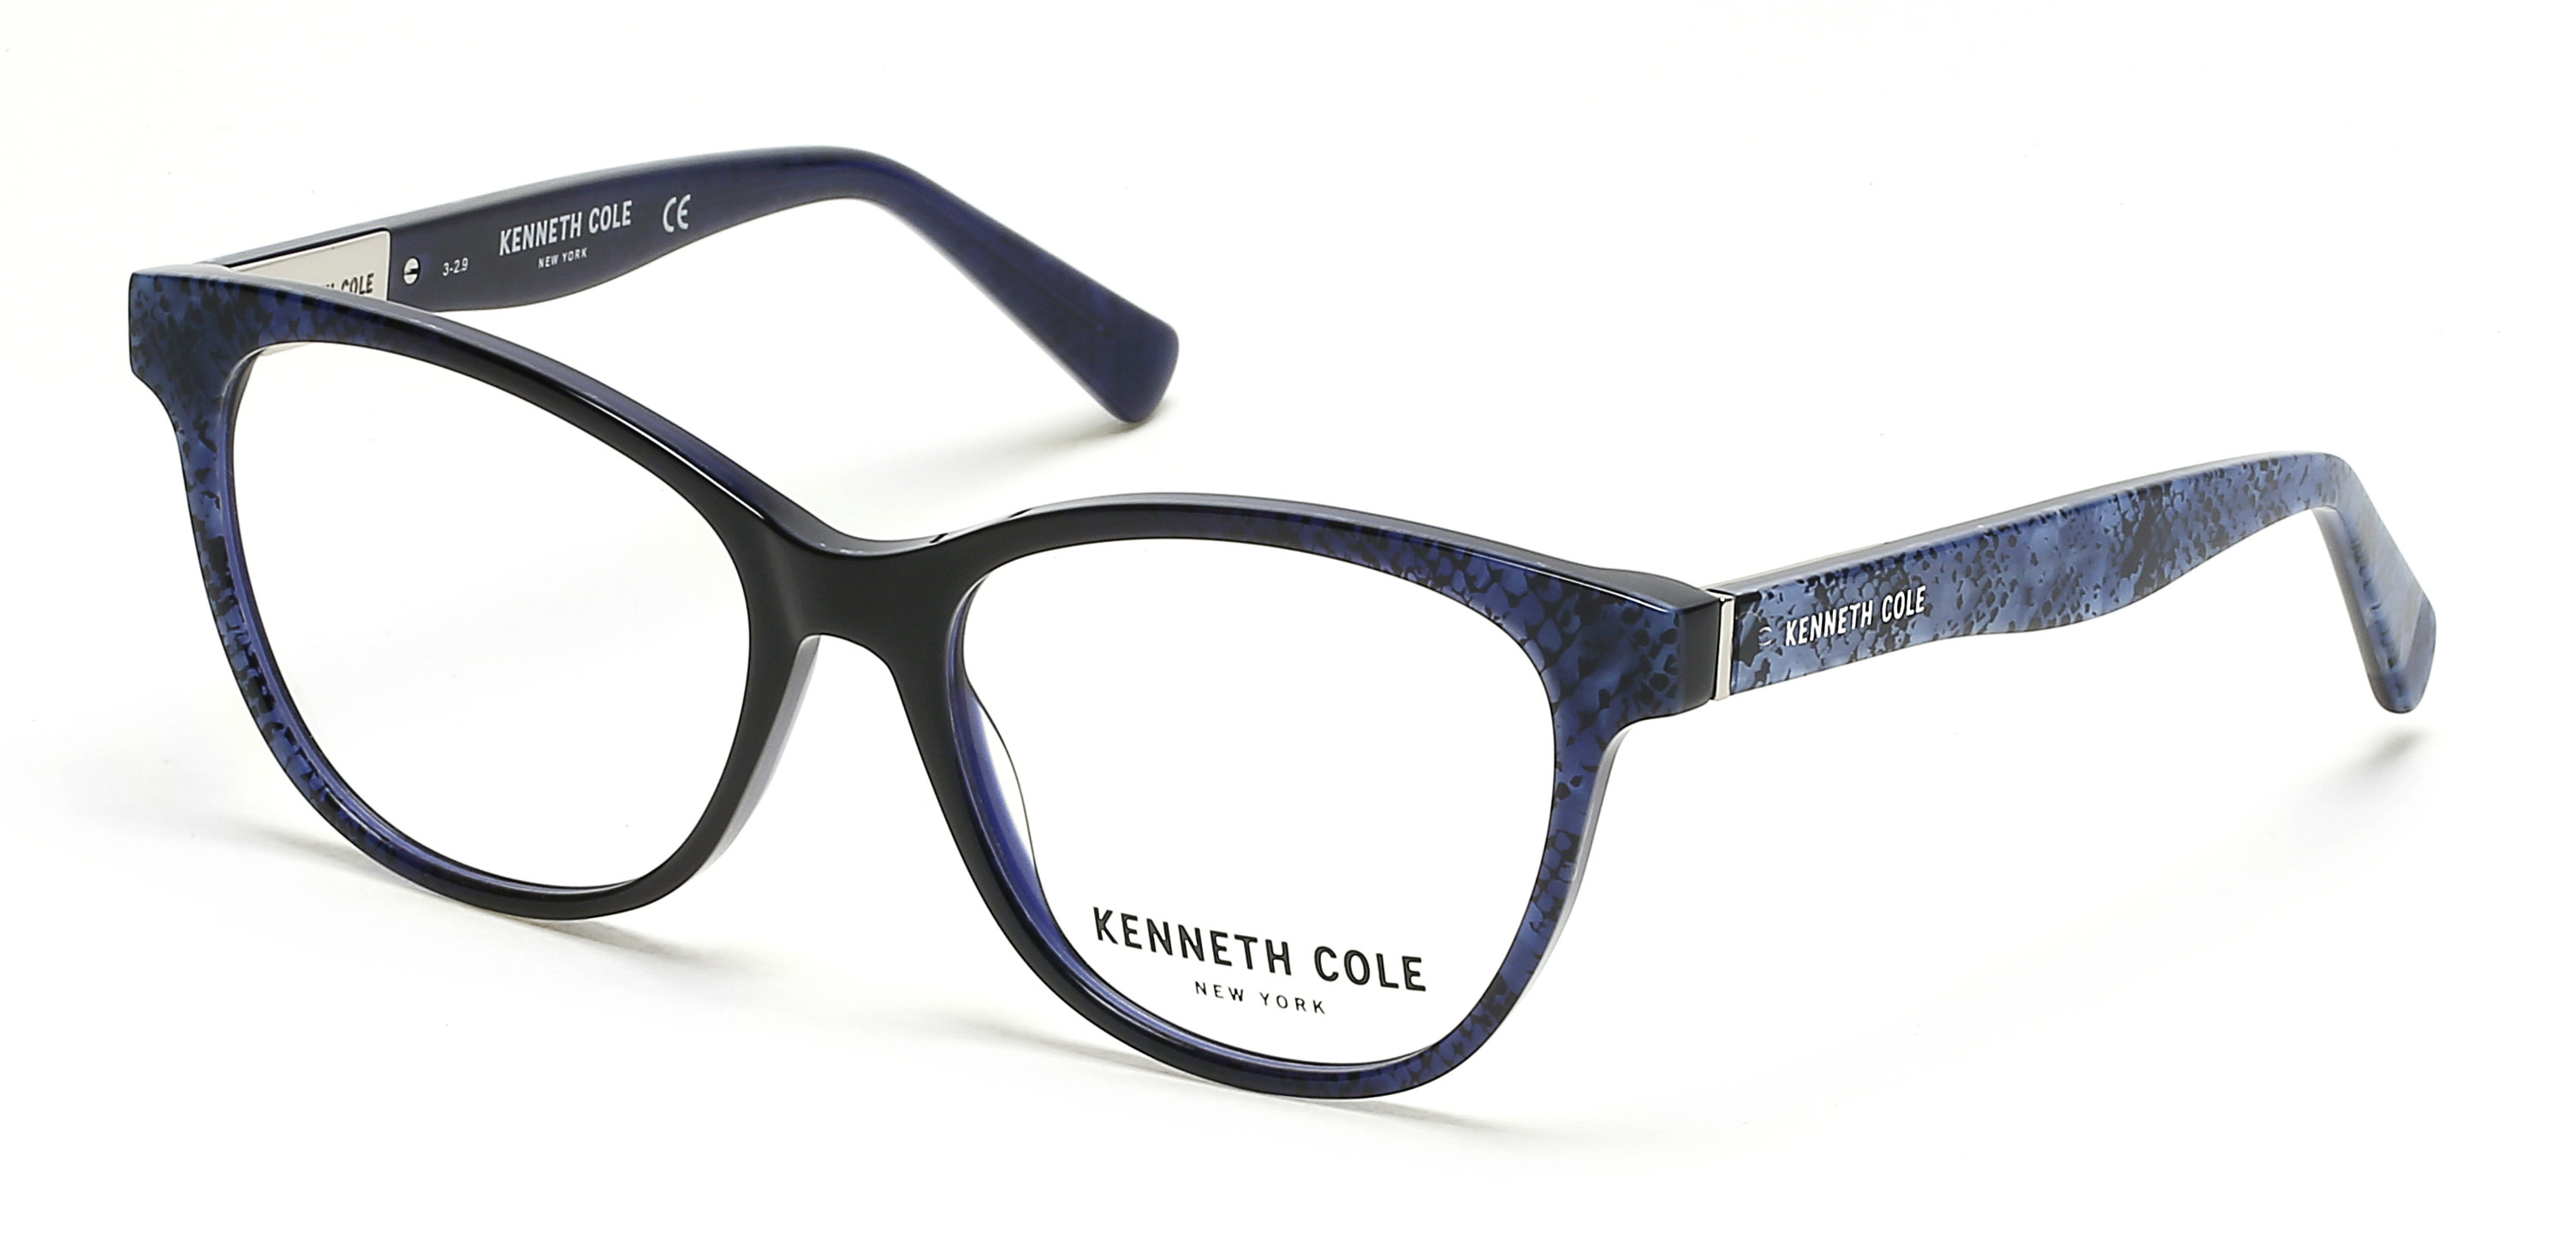 KENNETH COLE NY 0316 090